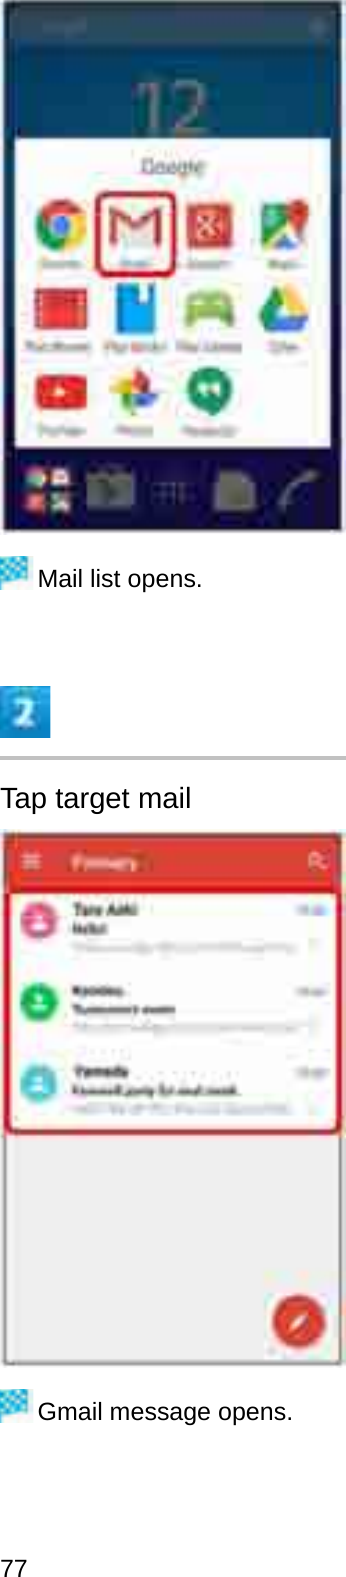 Mail list opens.Tap target mailGmail message opens.77